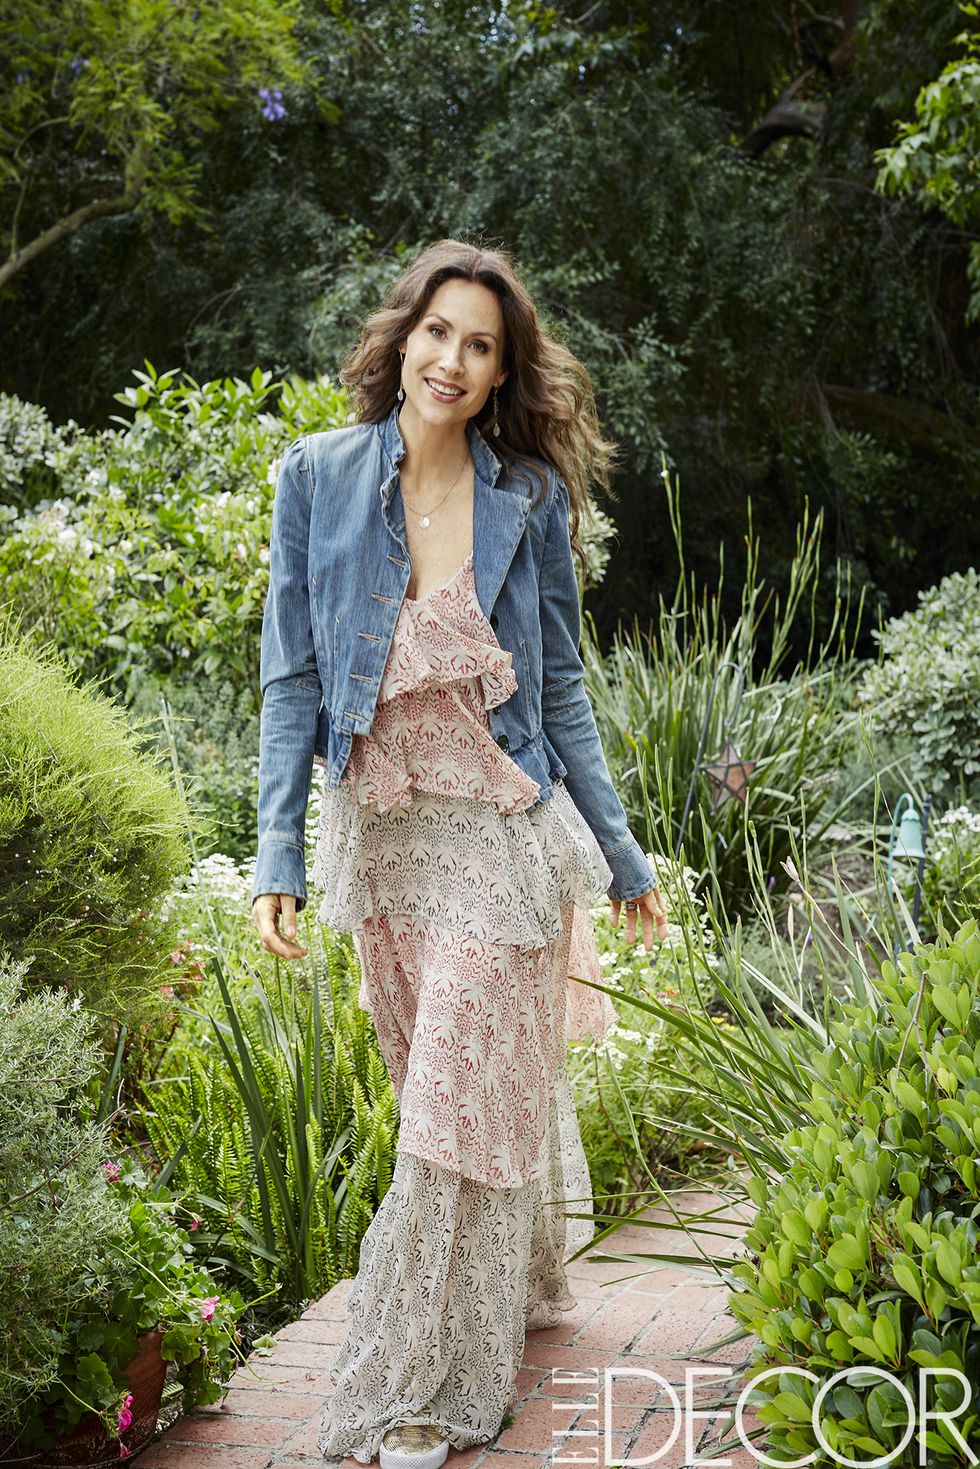 Minnie Driver in the garden of her home in Los Angeles, a 1940s ranch housedecorated by    Peter Dunham   .